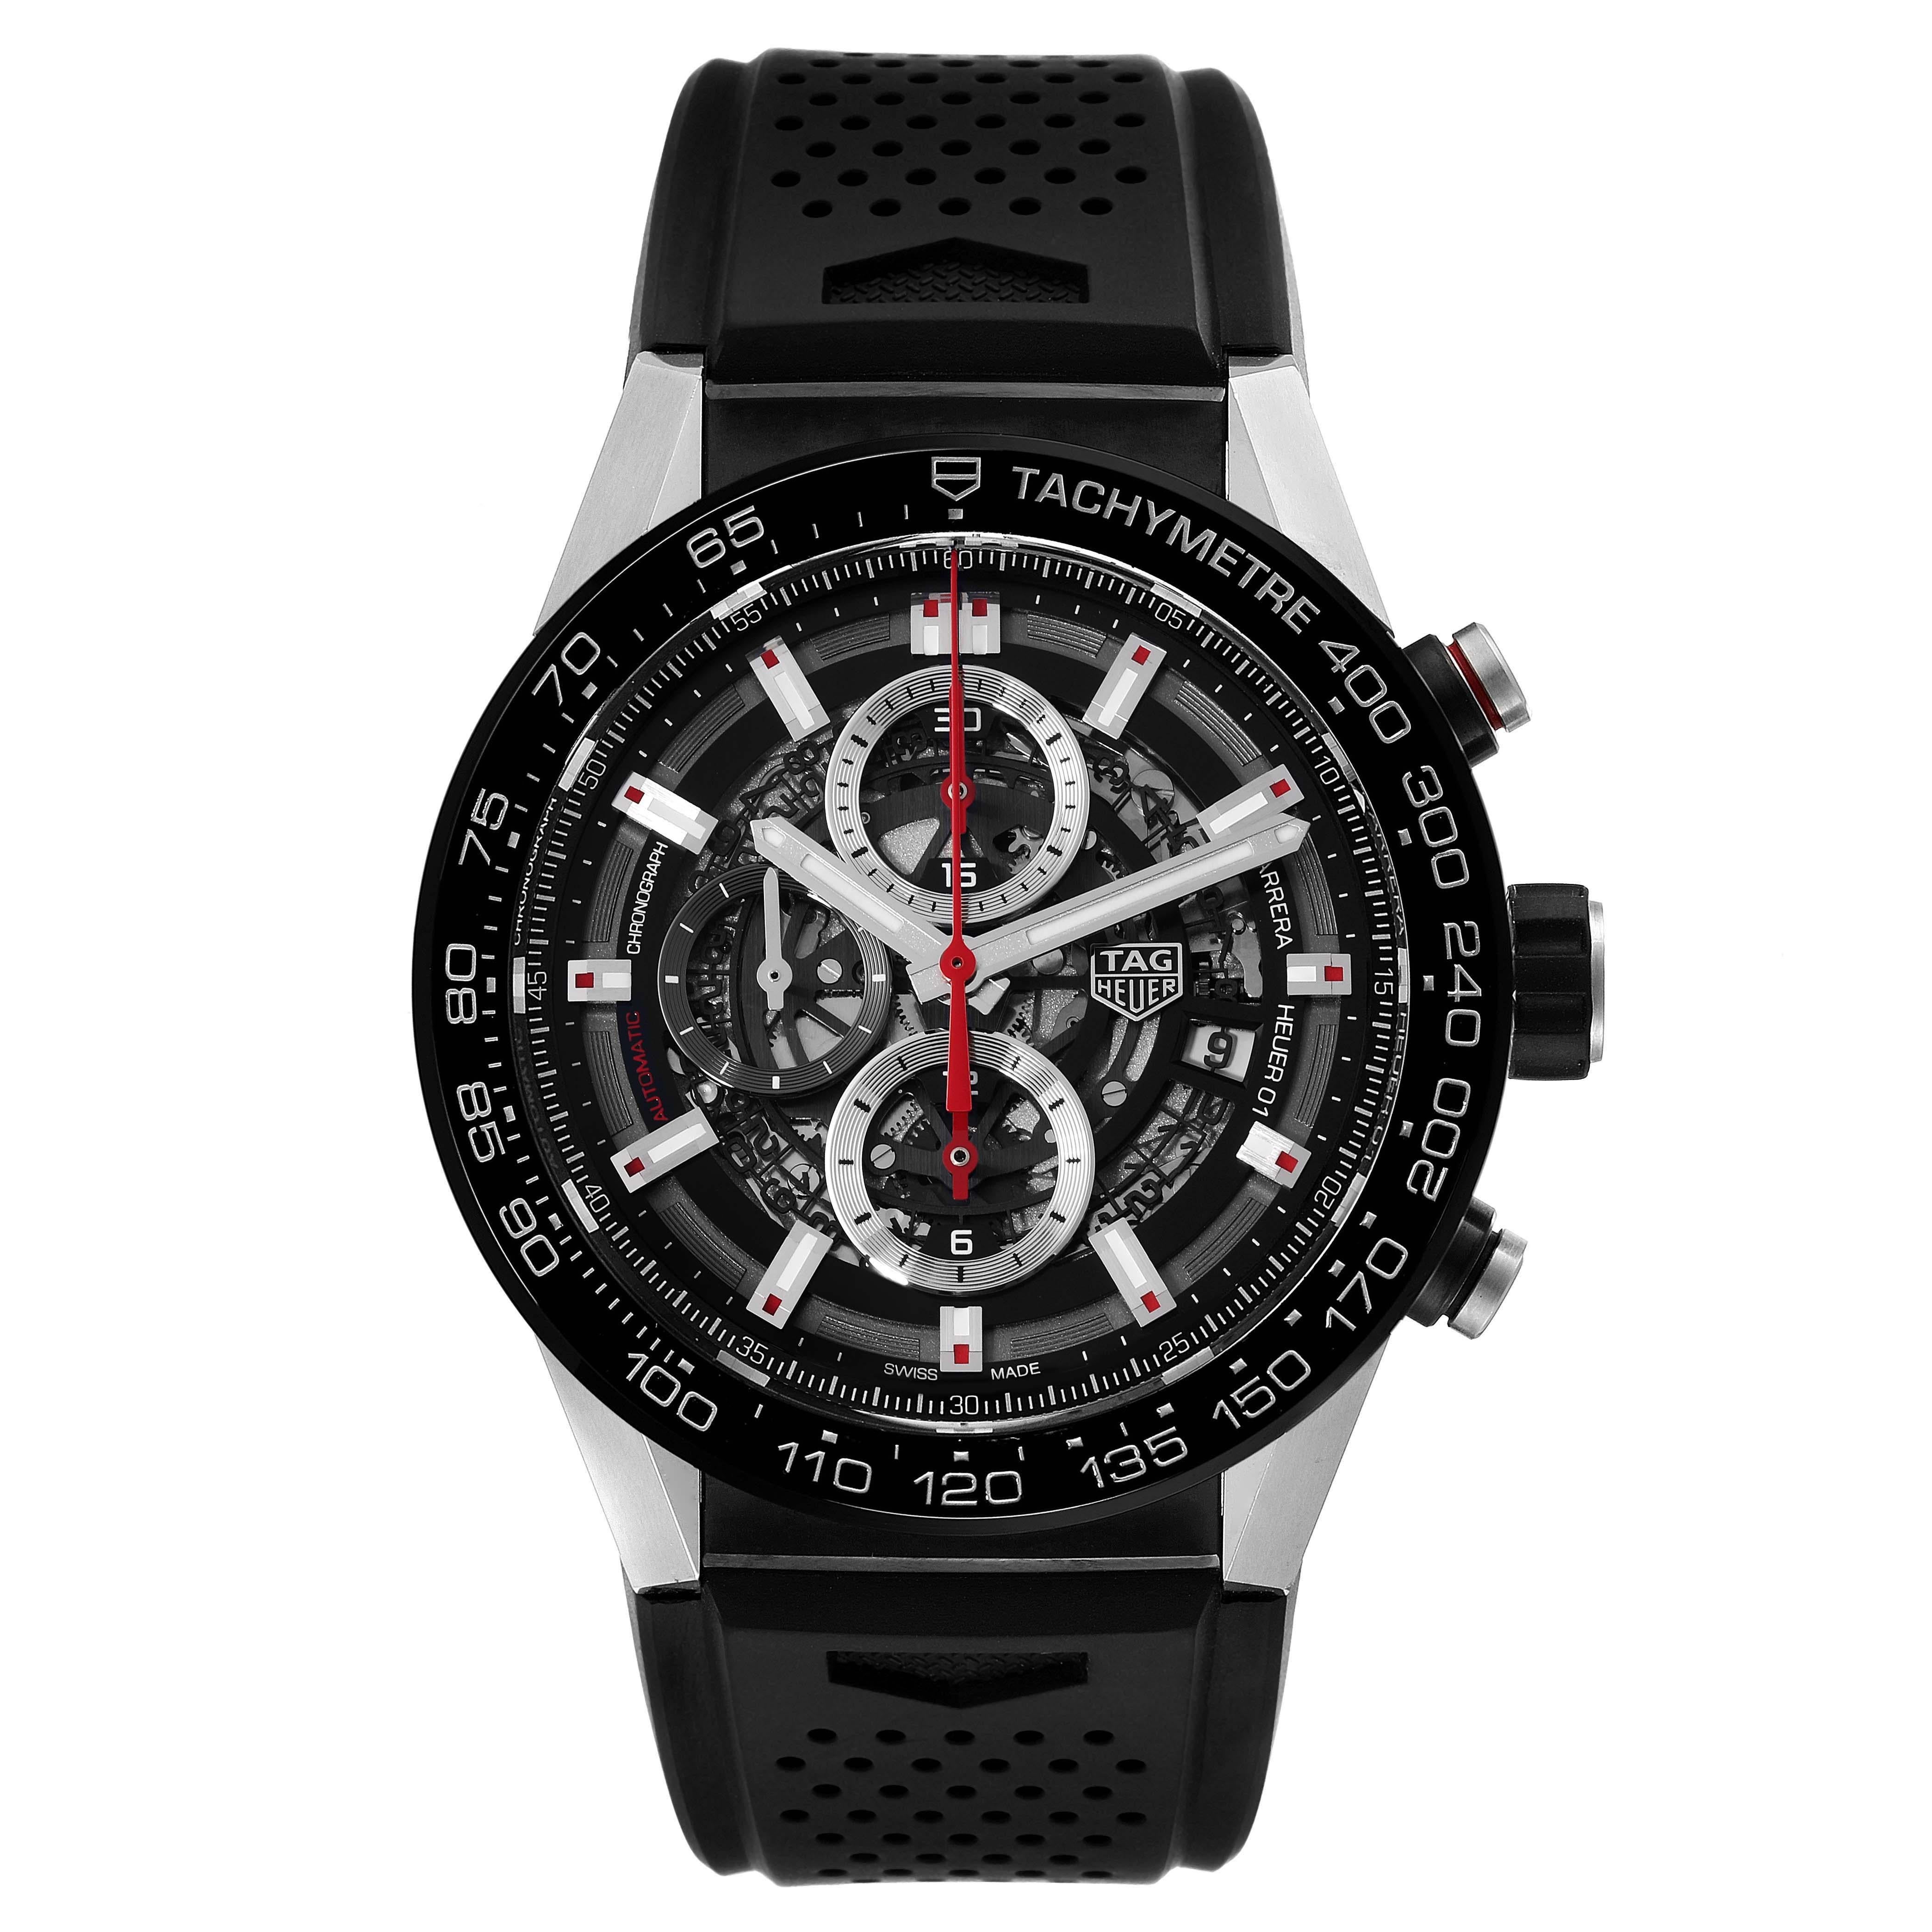 TAG Heuer Carrera Calibre Heuer 01 Skeleton Steel Mens Watch CAR2A1Z. Automatic self-winding movement. Stainless steel case 45 mm. Case thickness: 16.5 mm. Exhibition transparent sapphire crystal caseback. Brushed black titanium carbide coated